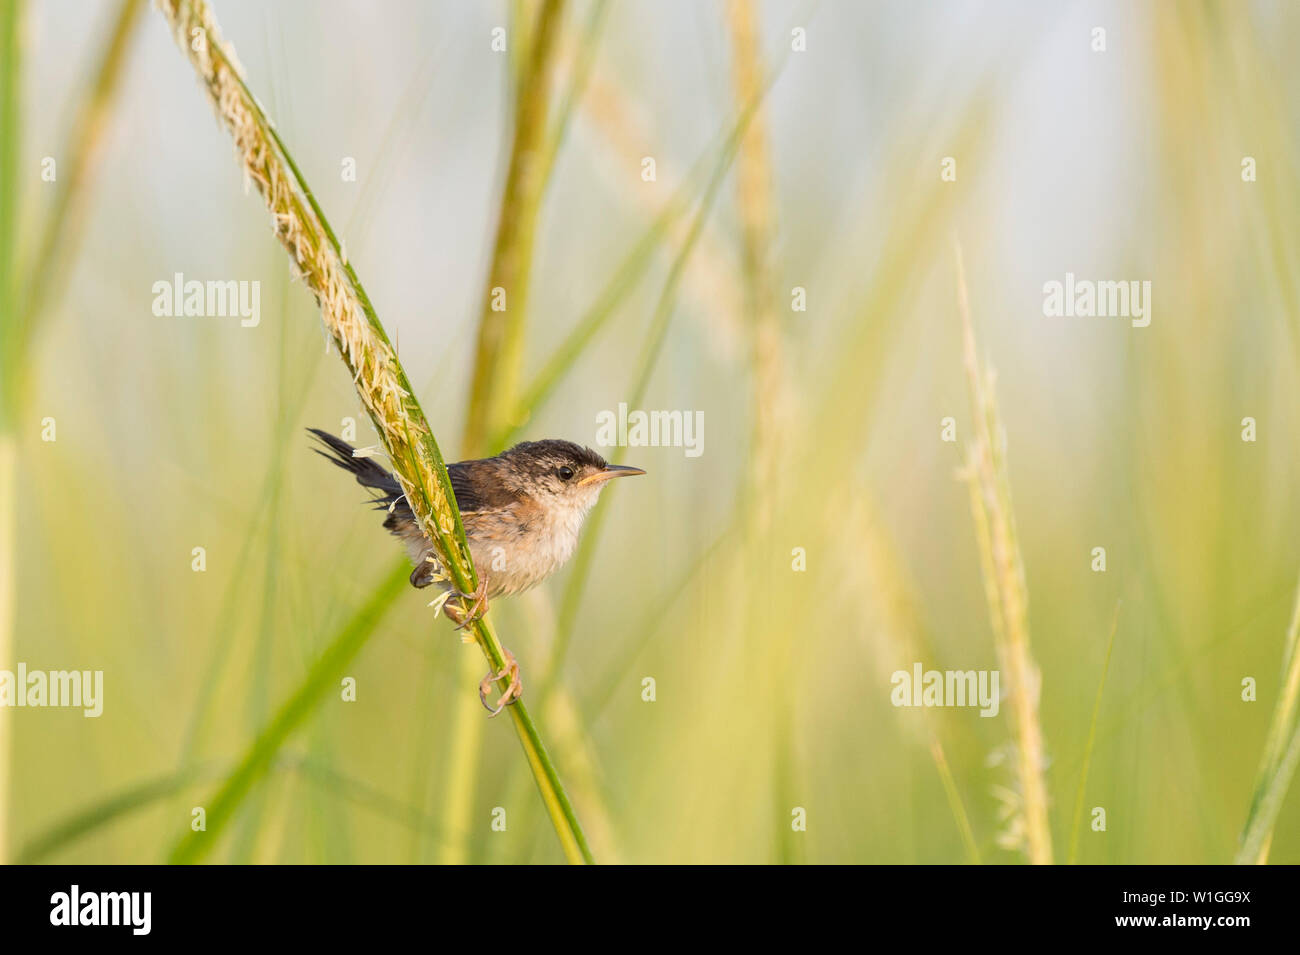 A small Marsh Wren perched on a piece of bright green marsh grasses in soft sunlight. Stock Photo